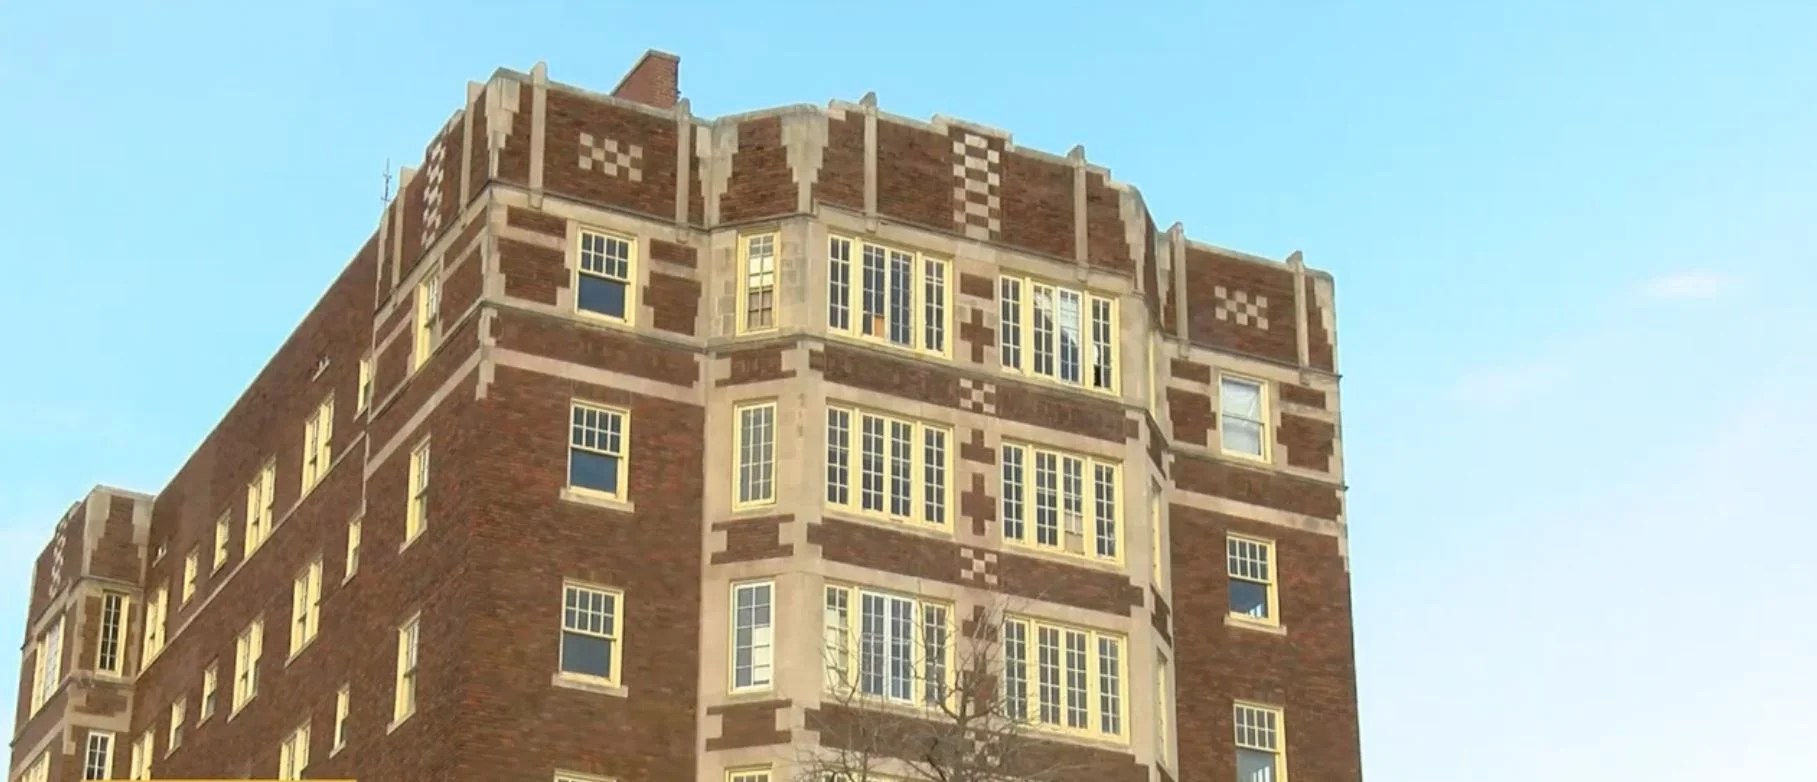 Indianapolis takes ownership of historic Drake building, plans for affordable housing